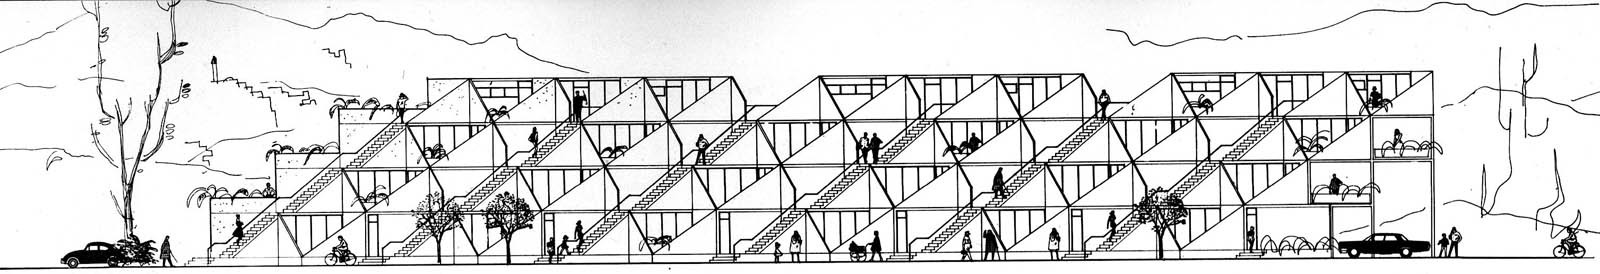 Section view highlighting the pre-fabricated, trapezoid shapes that defined the original construction. (Plan courtesy Arieh Sharon office)